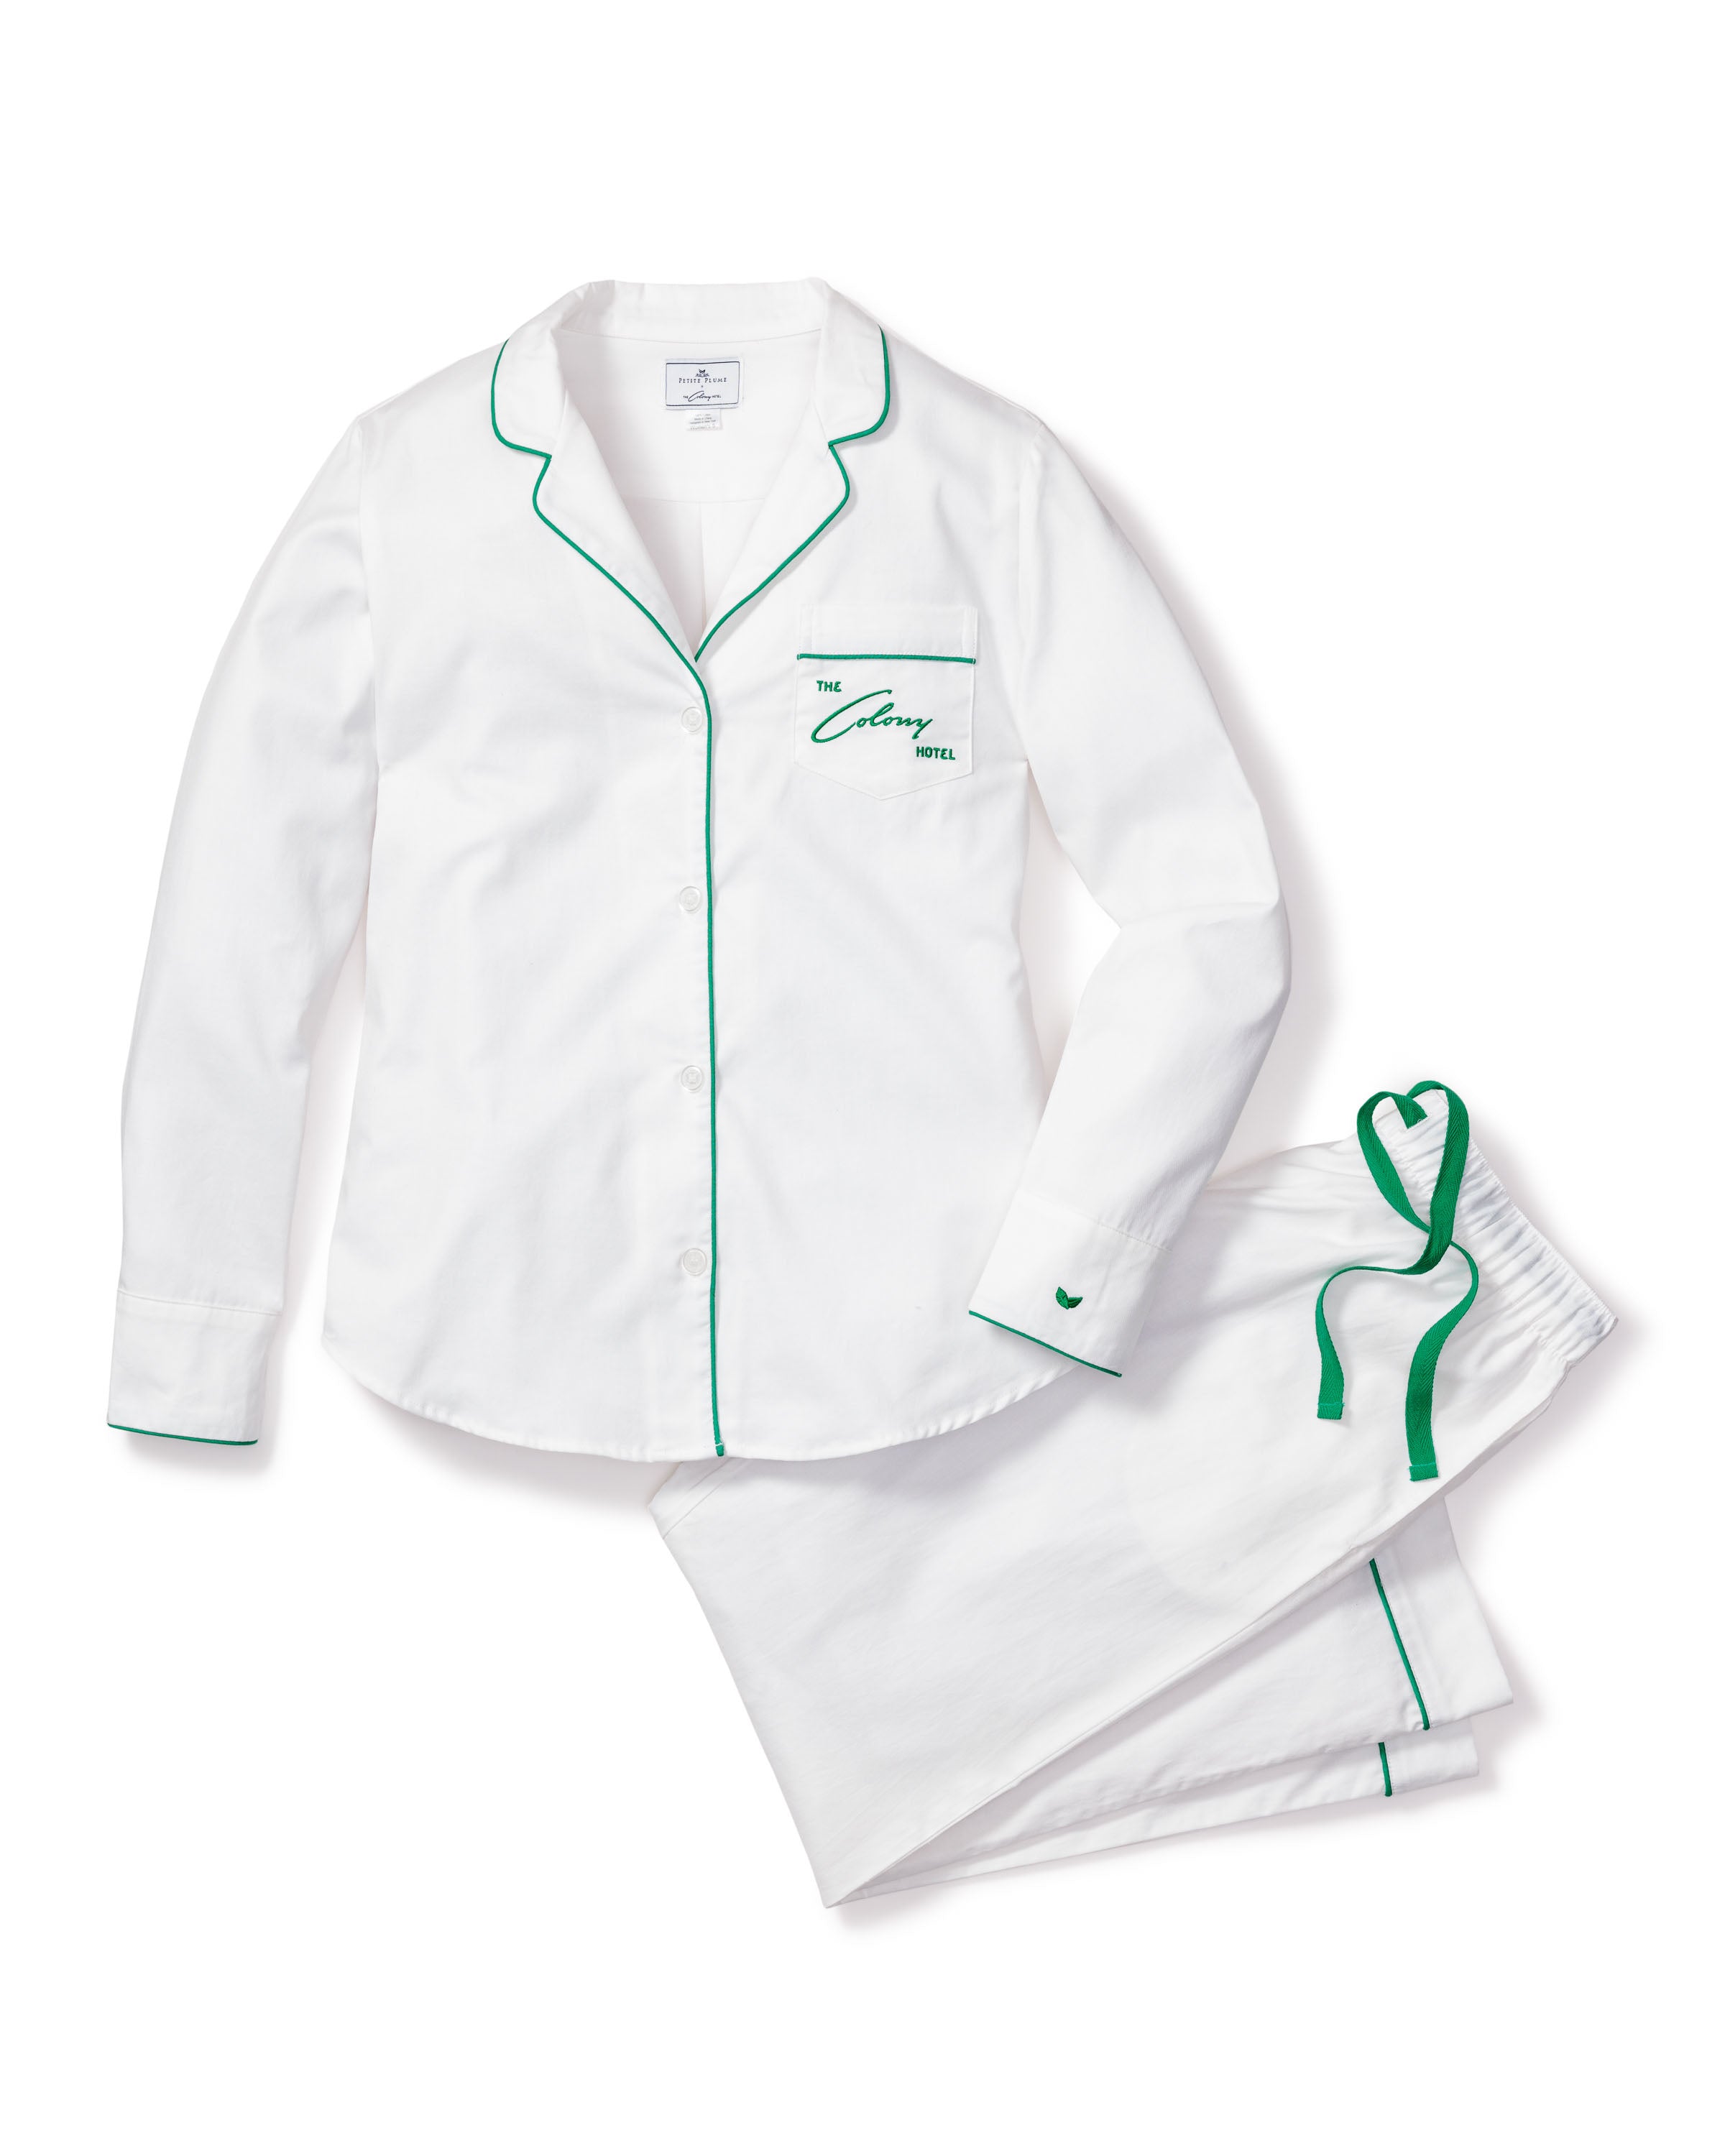 Colony Hotel x Petite Plume Women's White with Green Piping Pajama Set